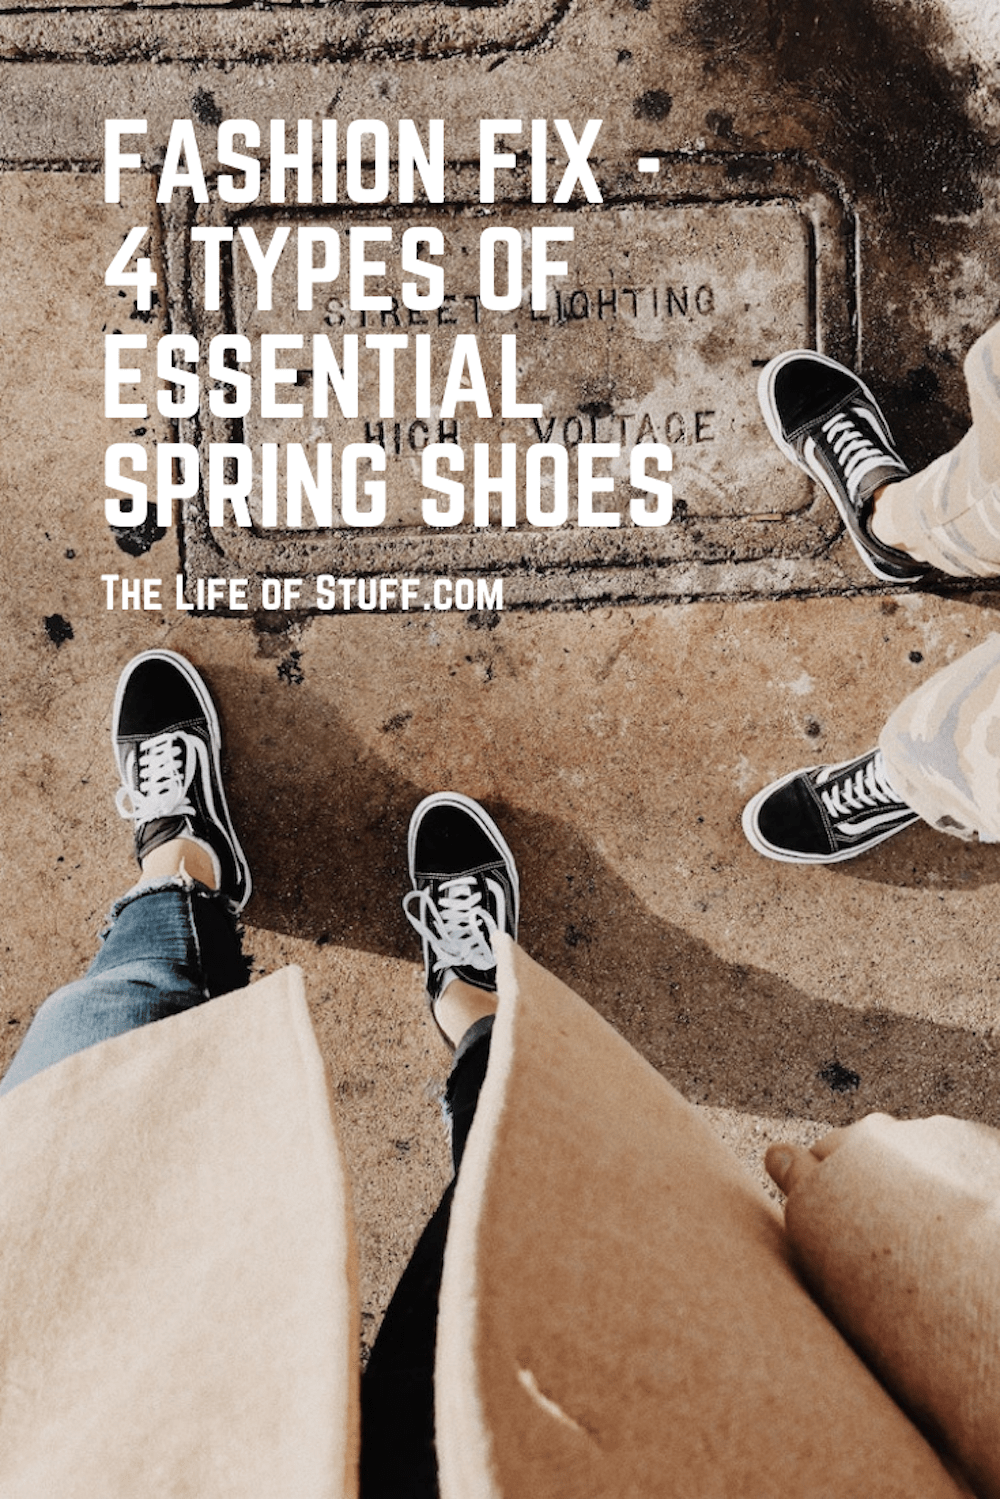 The Life of Stuff - Fashion Fix - 4 Types of Essential Spring Shoes